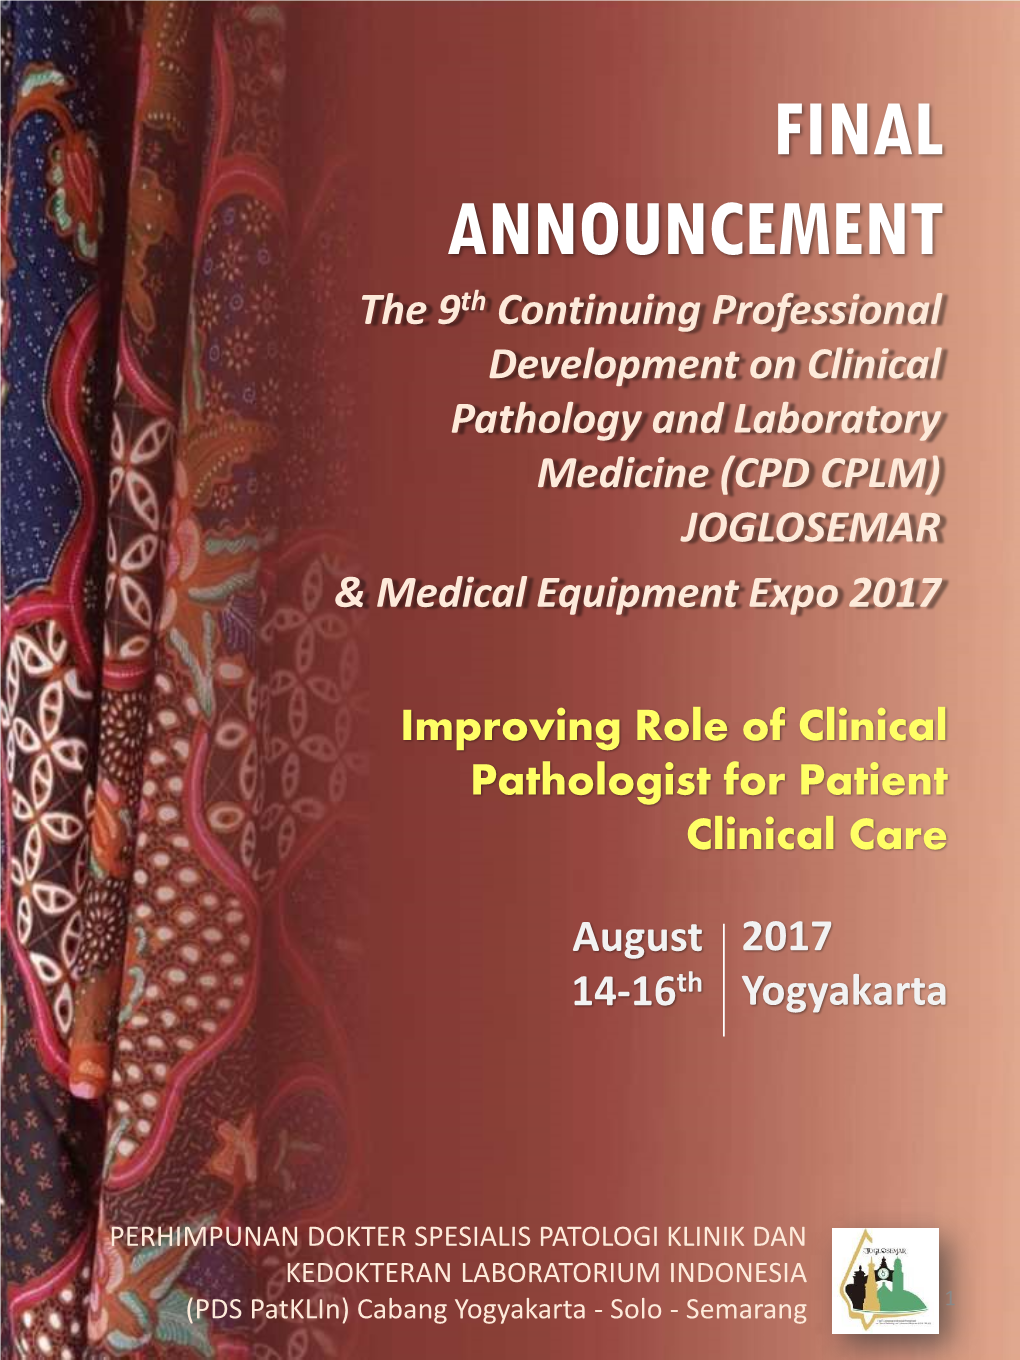 FINAL ANNOUNCEMENT the 9Th Continuing Professional Development on Clinical Pathology and Laboratory Medicine (CPD CPLM) JOGLOSEMAR & Medical Equipment Expo 2017